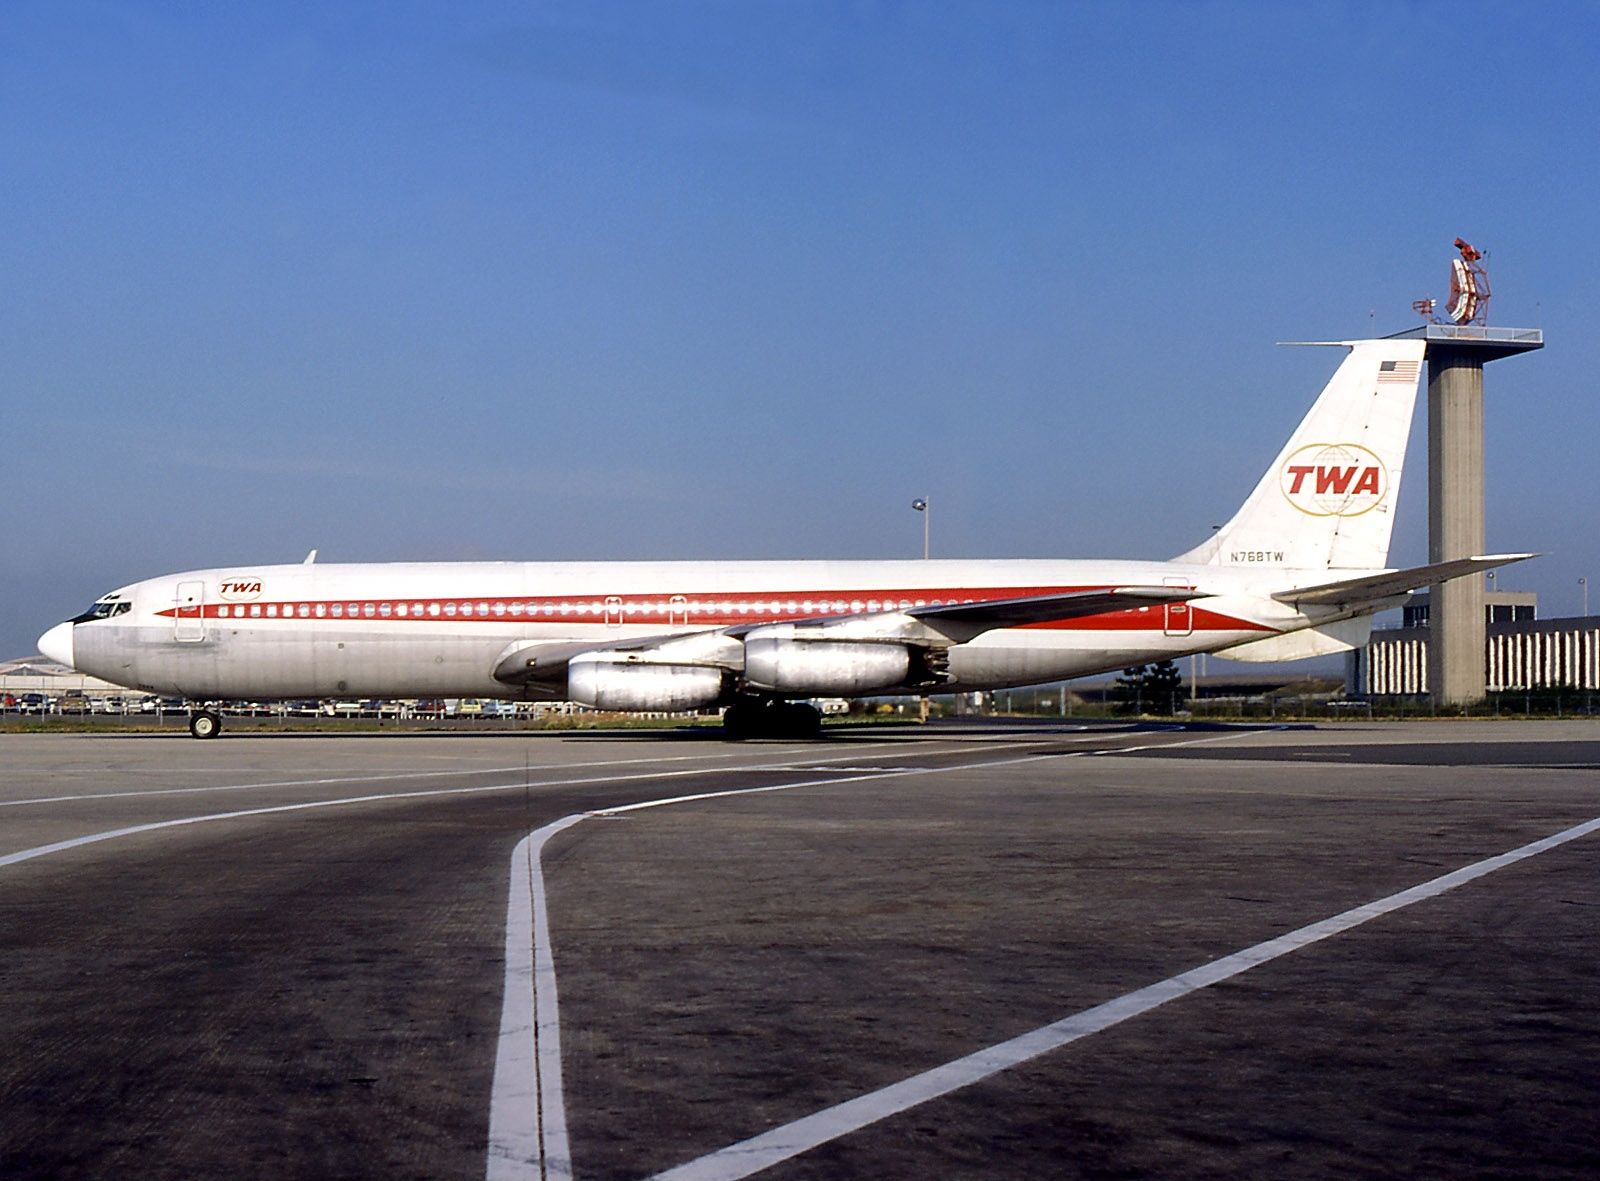 What would the TWA 841 story look like today?